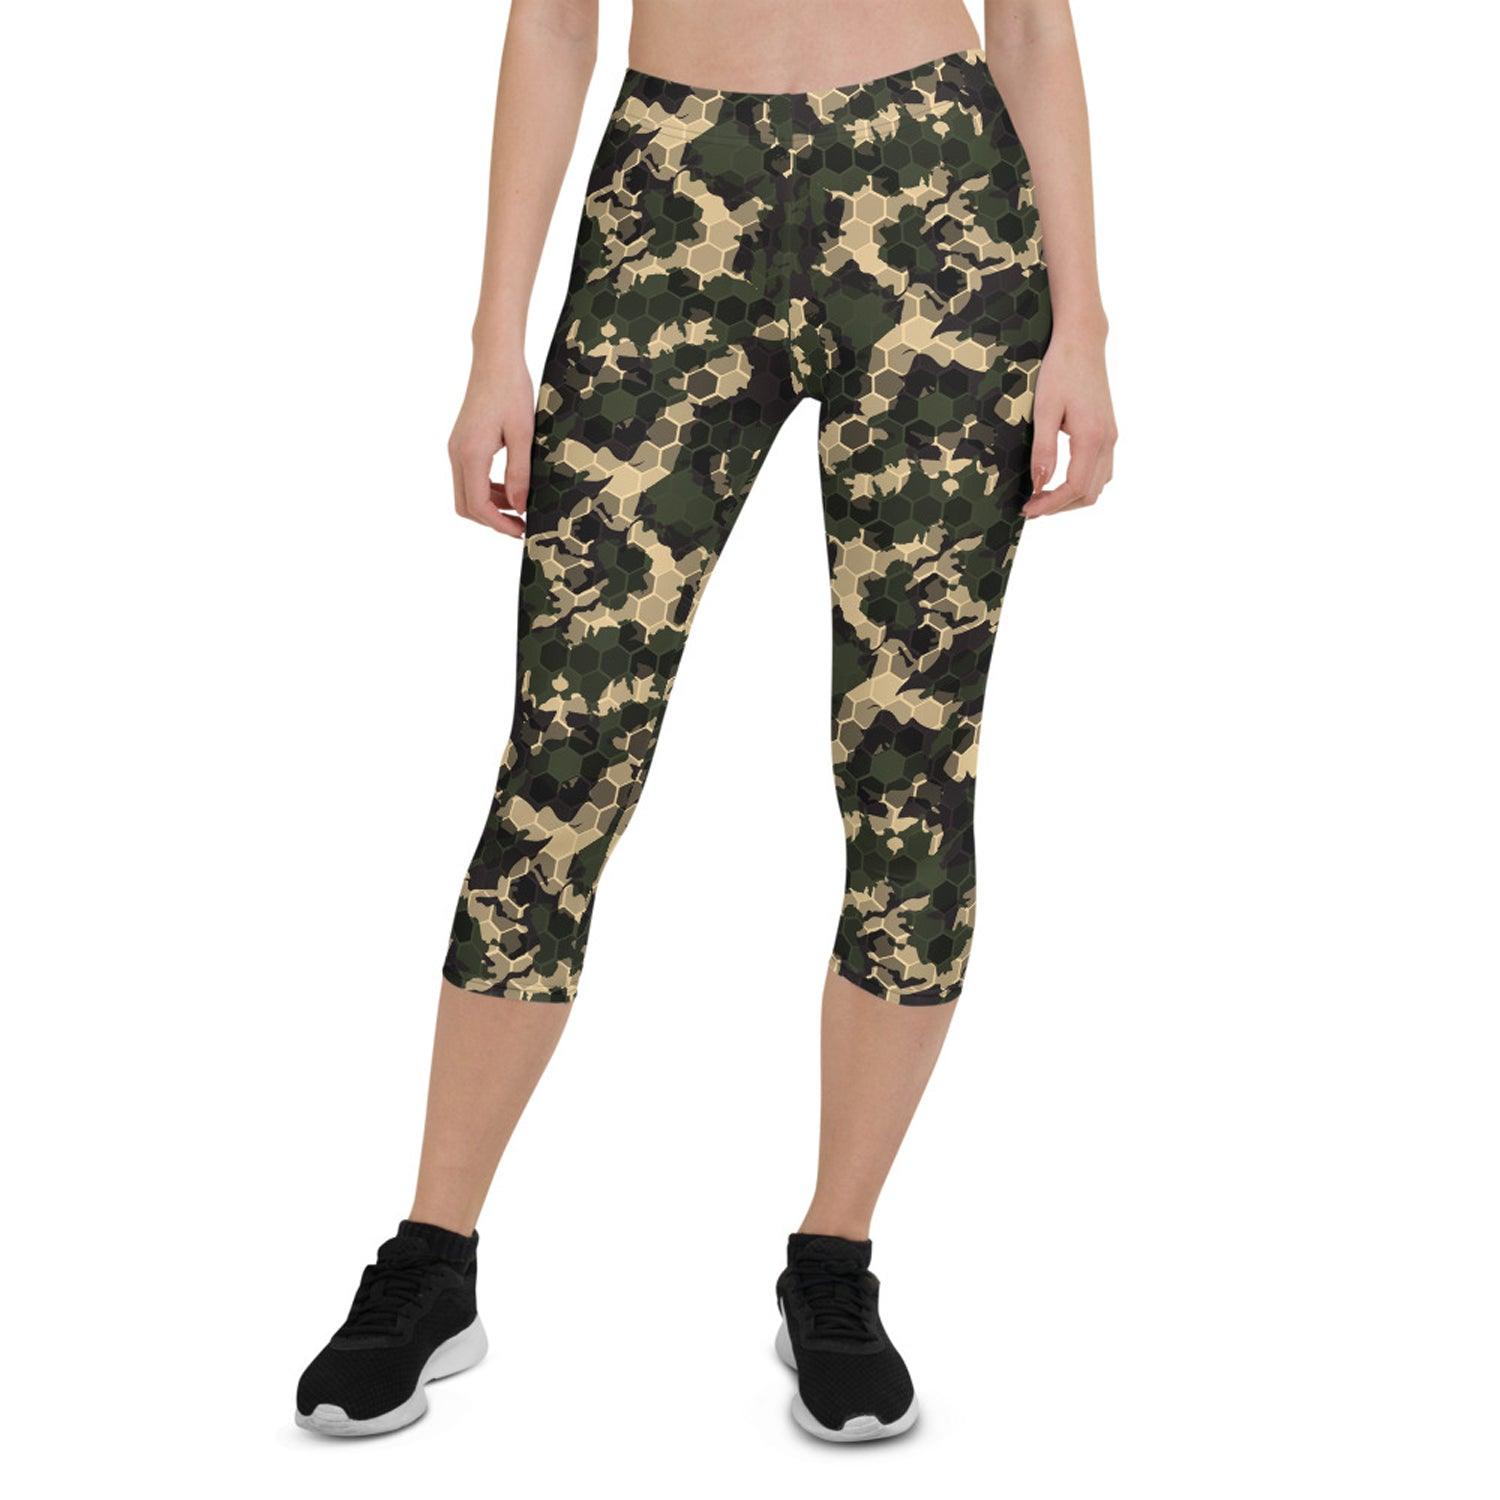 Womens Army Camo Capri Leggings with Honeycombs - VirtuousWares:Global